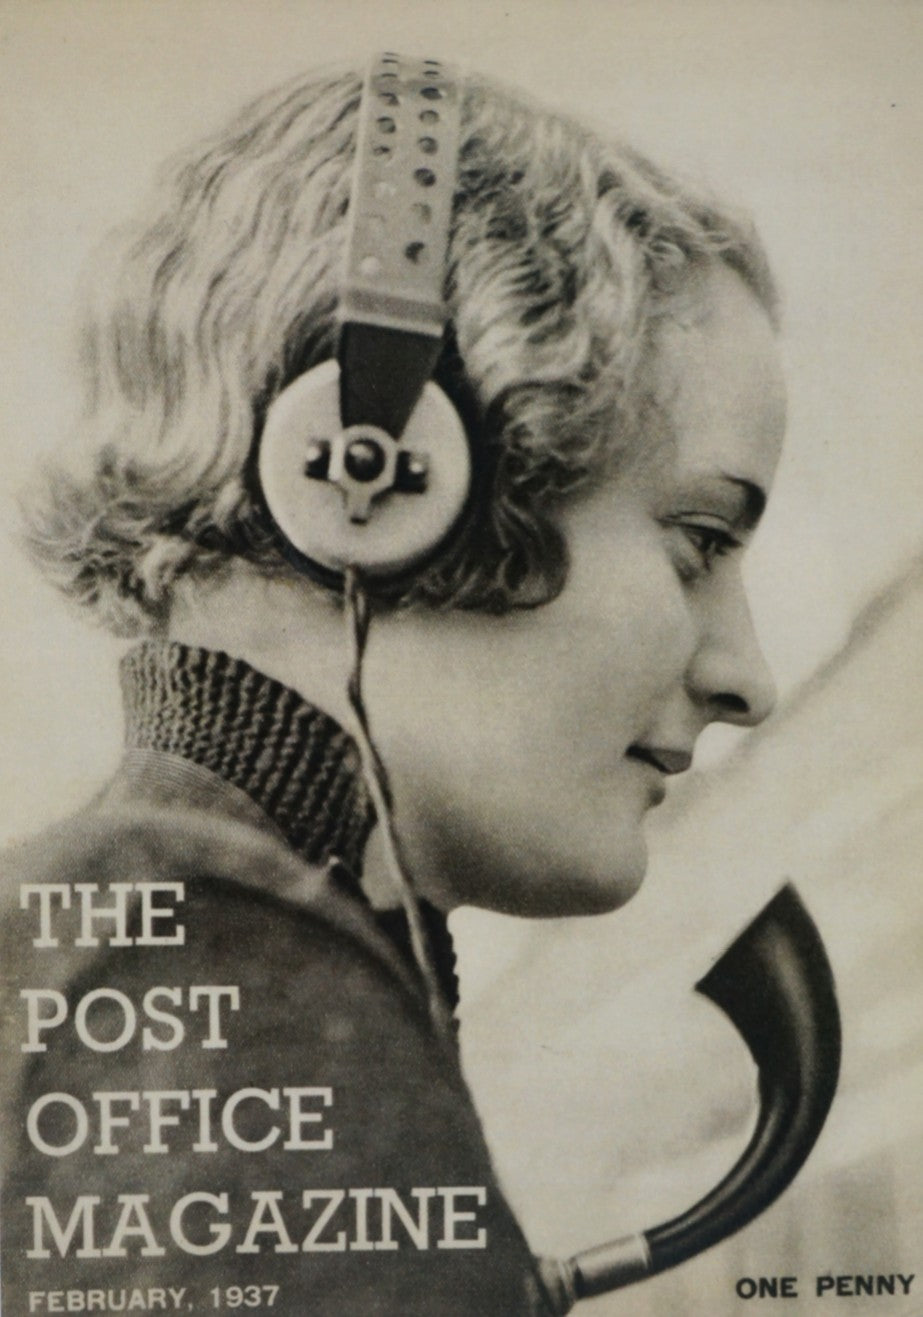 Post Office Magazine Covers Postcard Pack